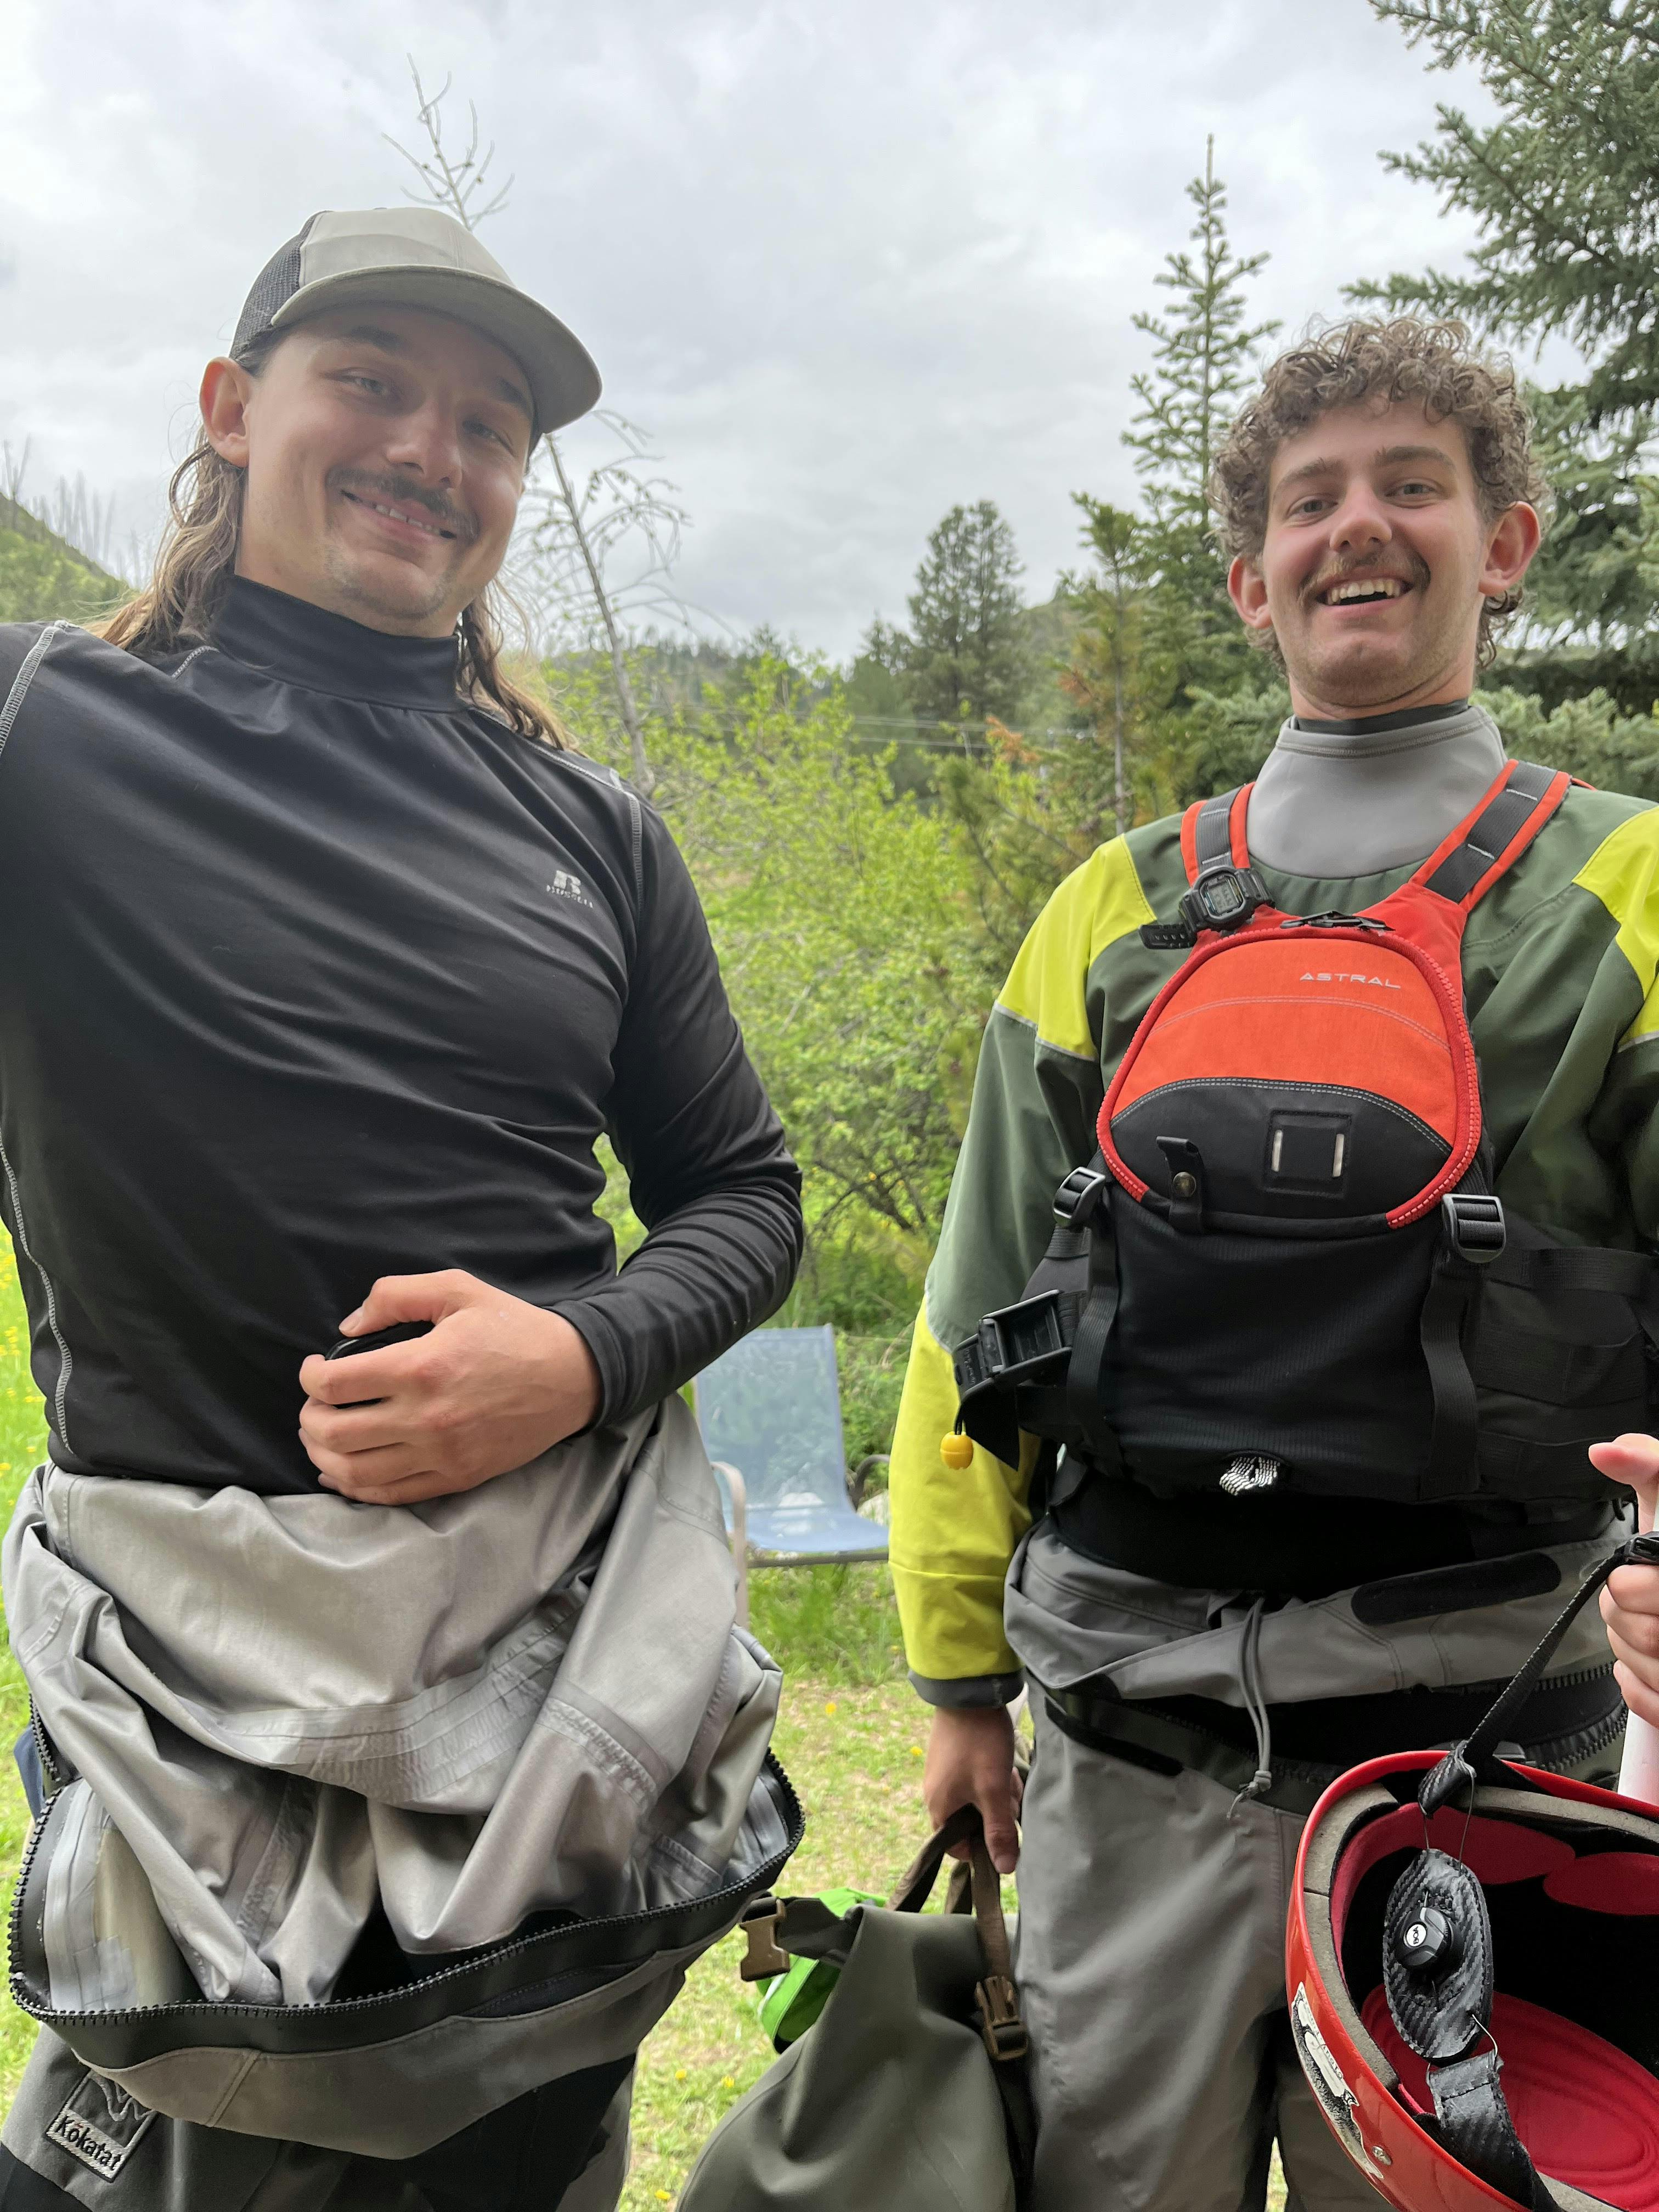 Wildwater River Guides Cheyton and Brode geared up for our first early season Wenatchee rafting trip.